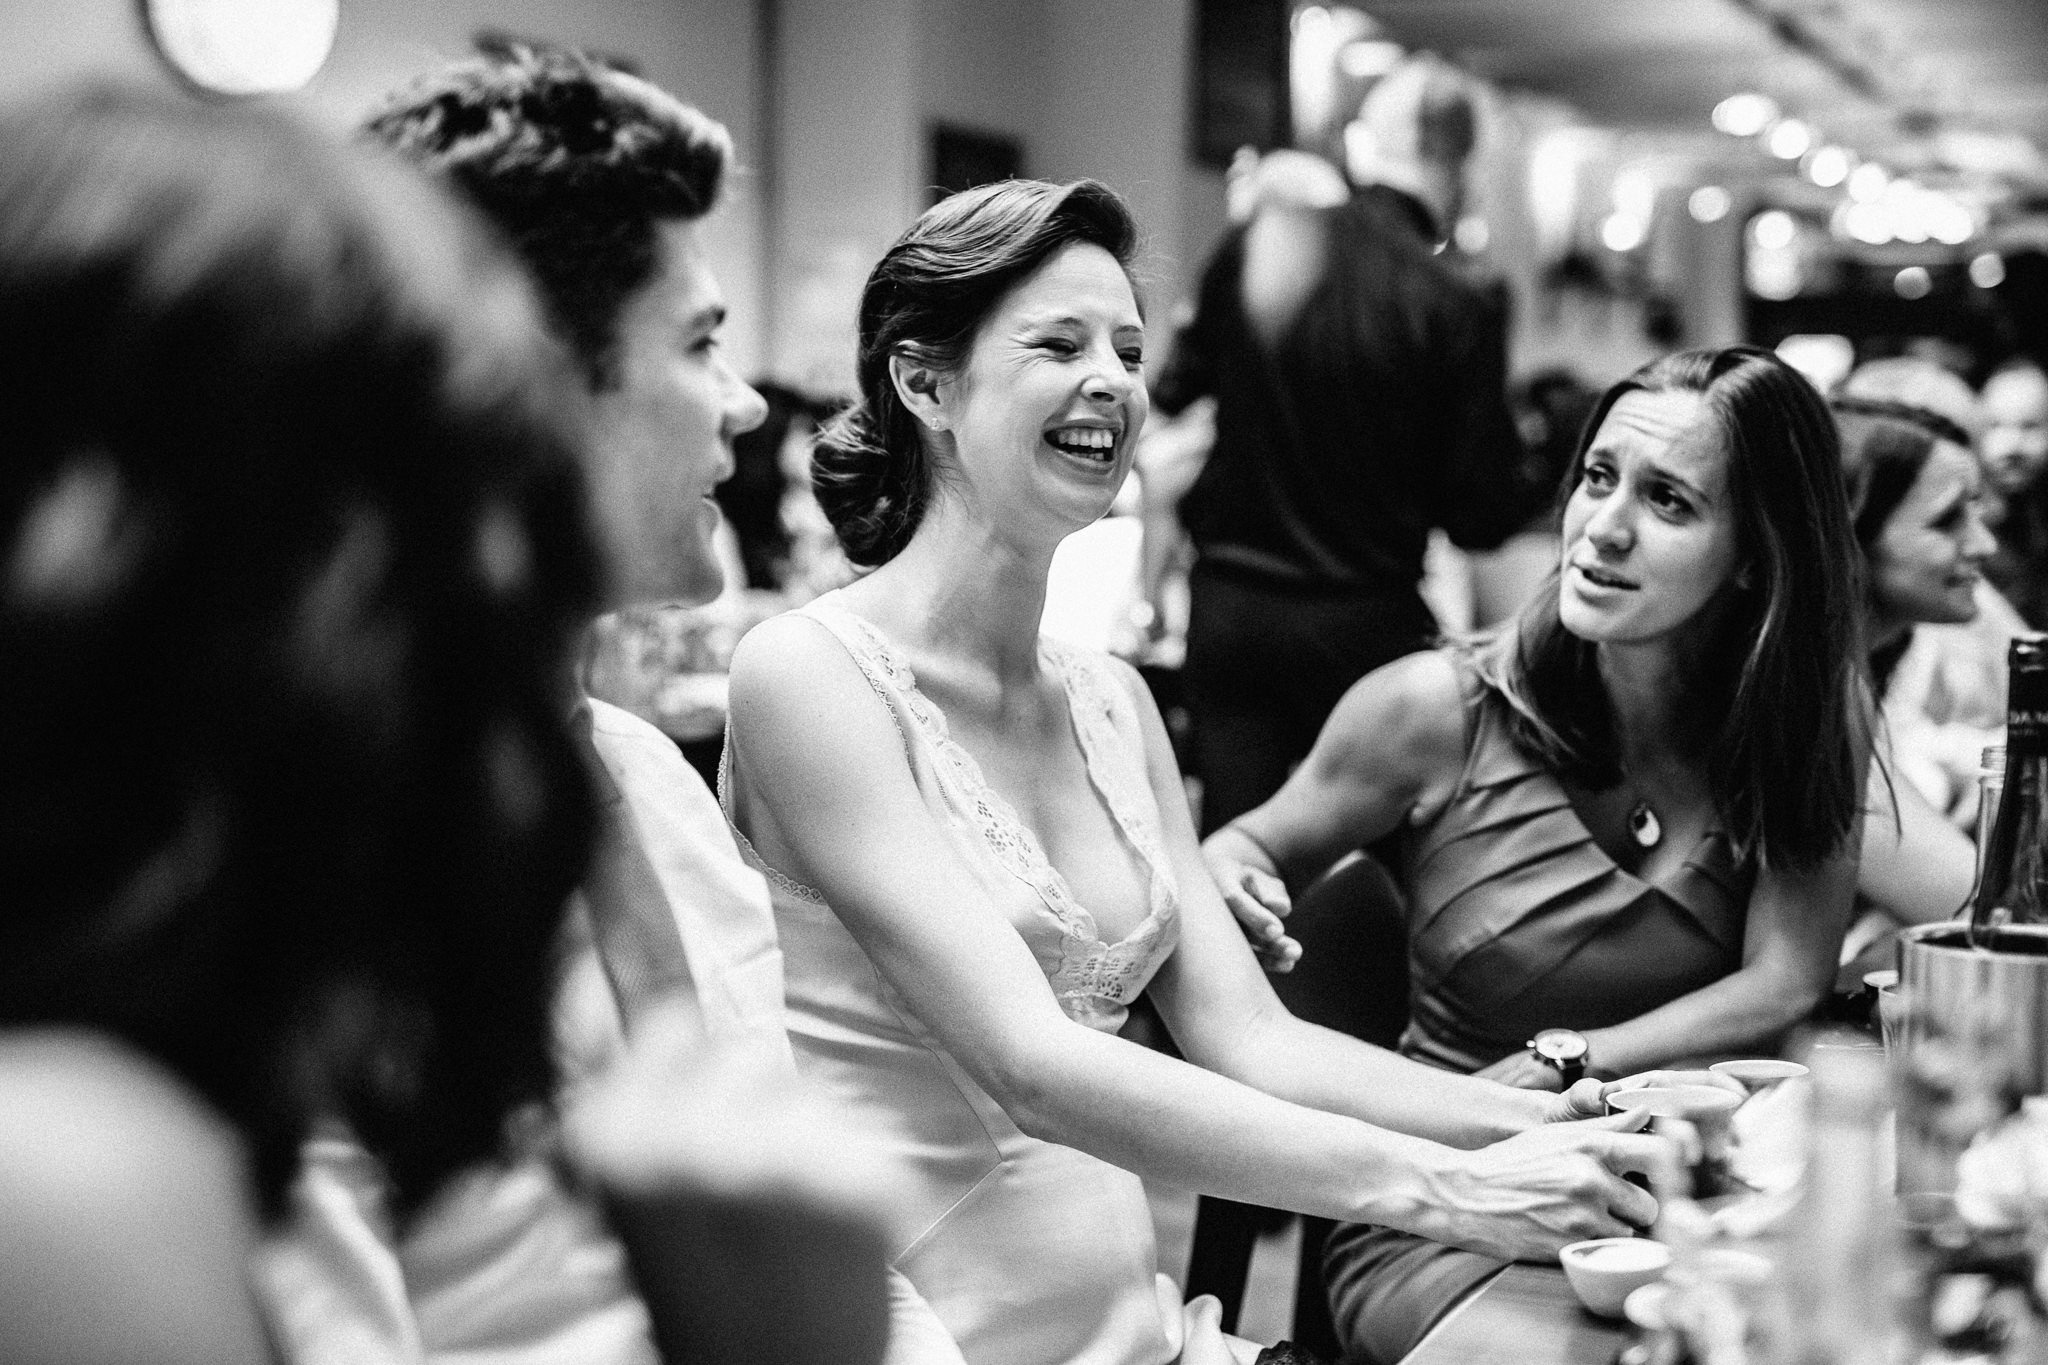  Bride laughing with her friends 